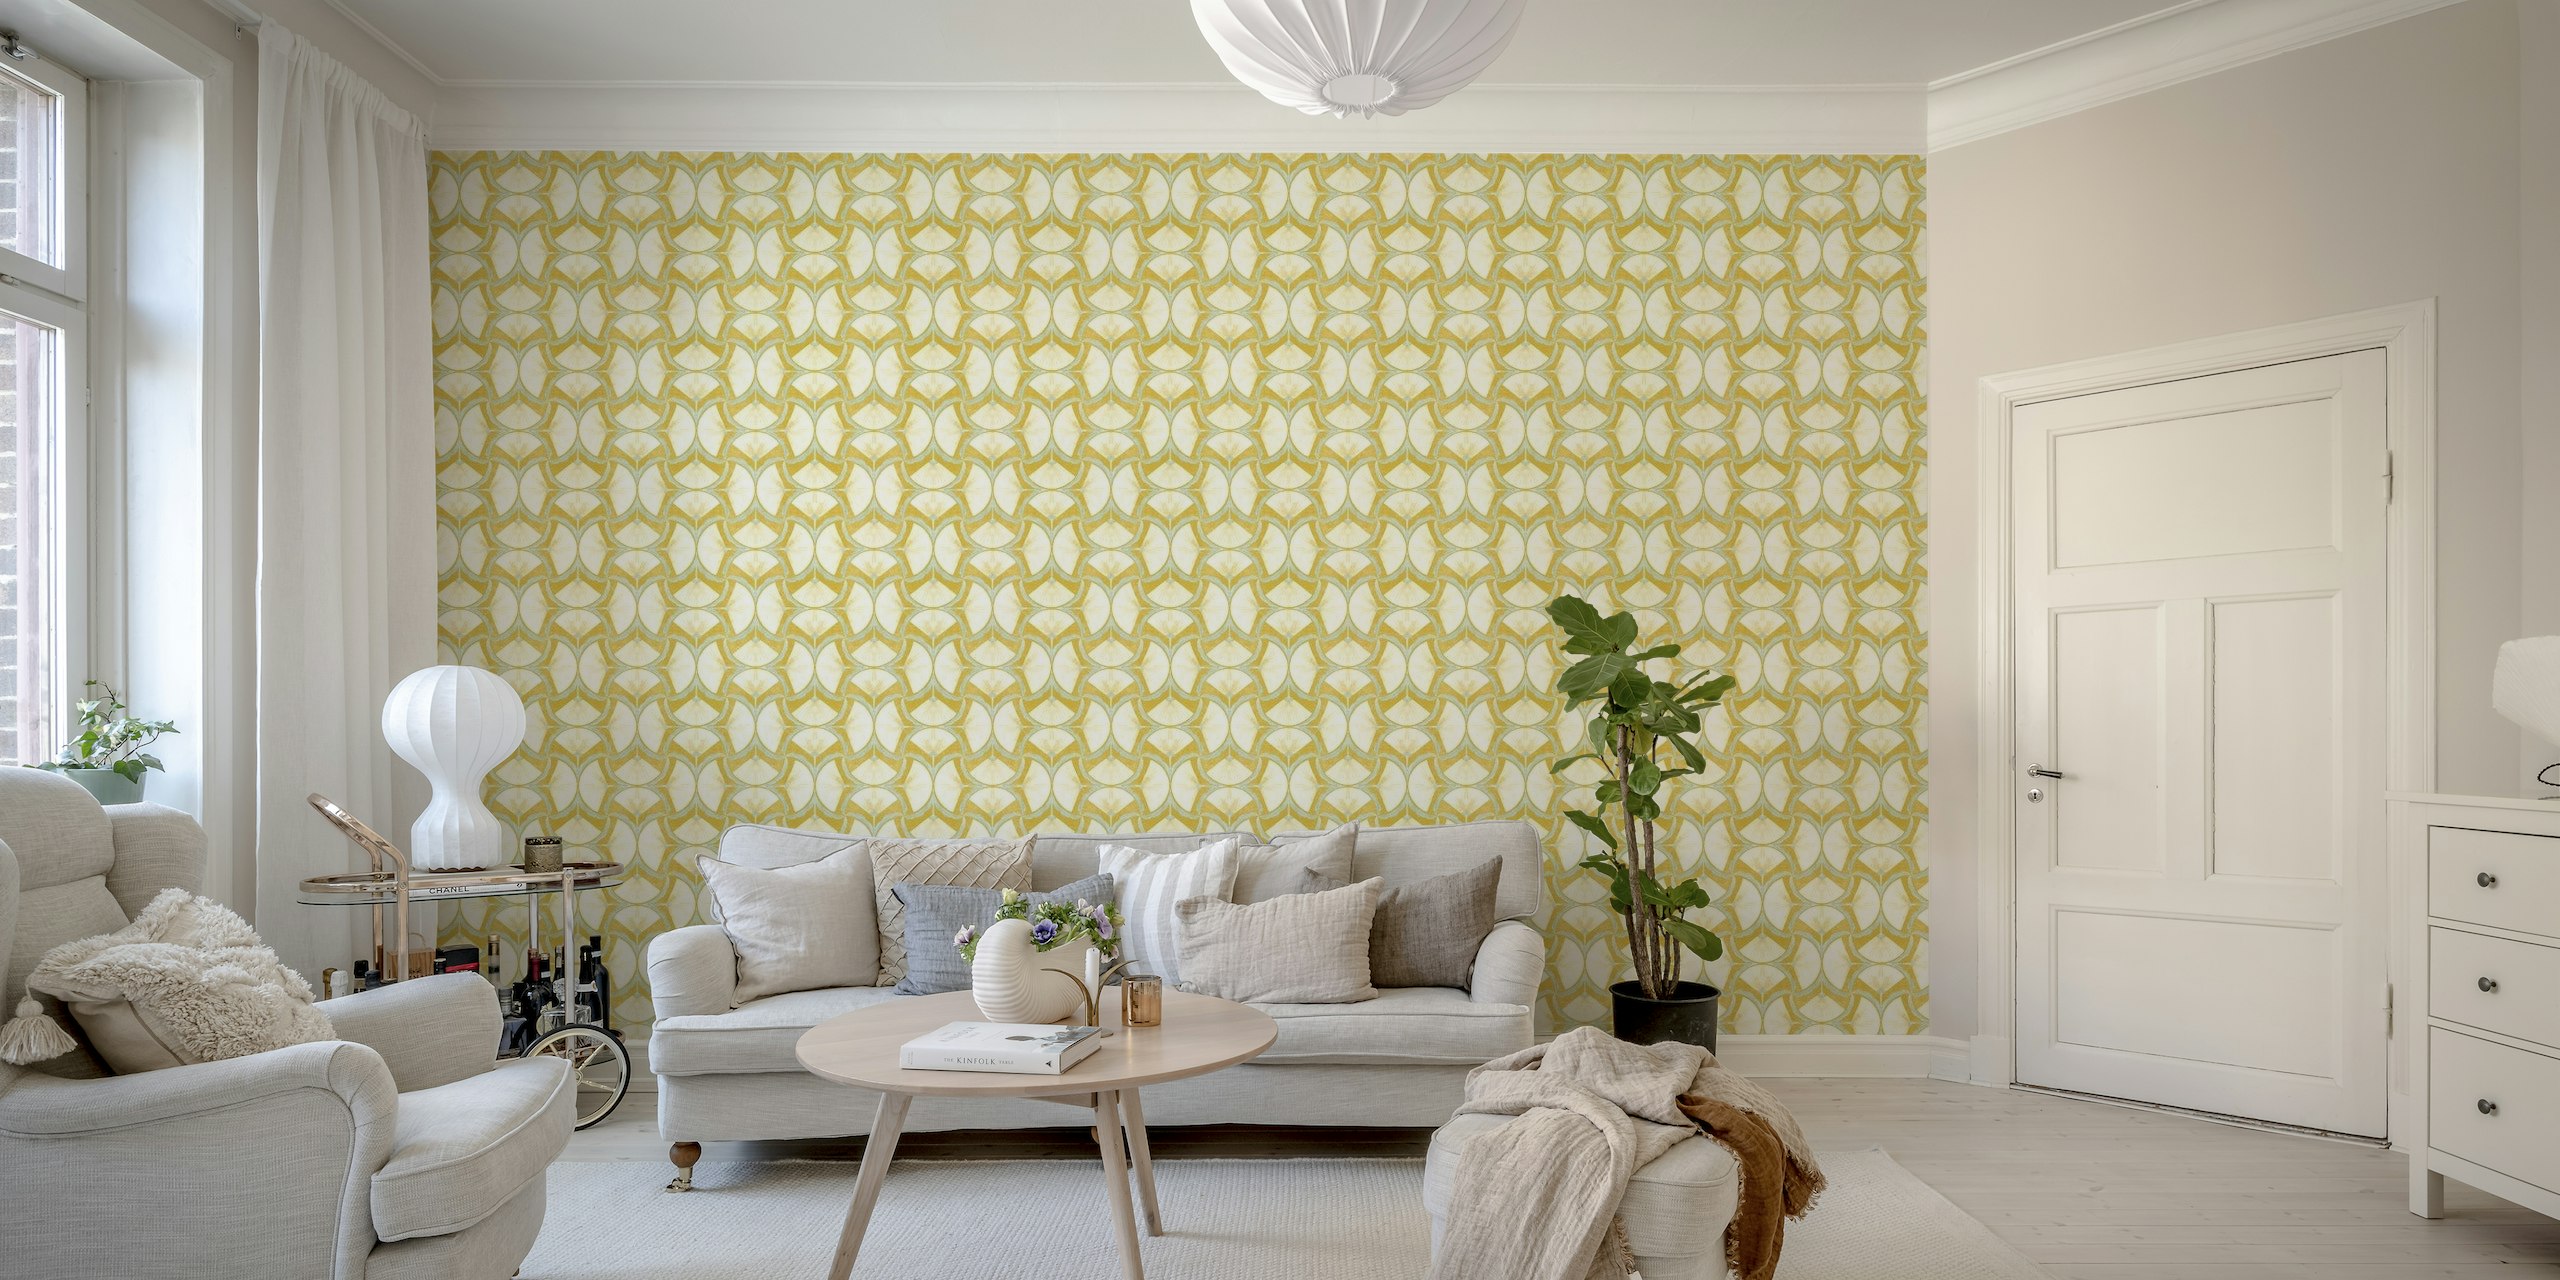 Floral Harmony: Delicate Hand-Drawn Symmetry on mustard background tapete